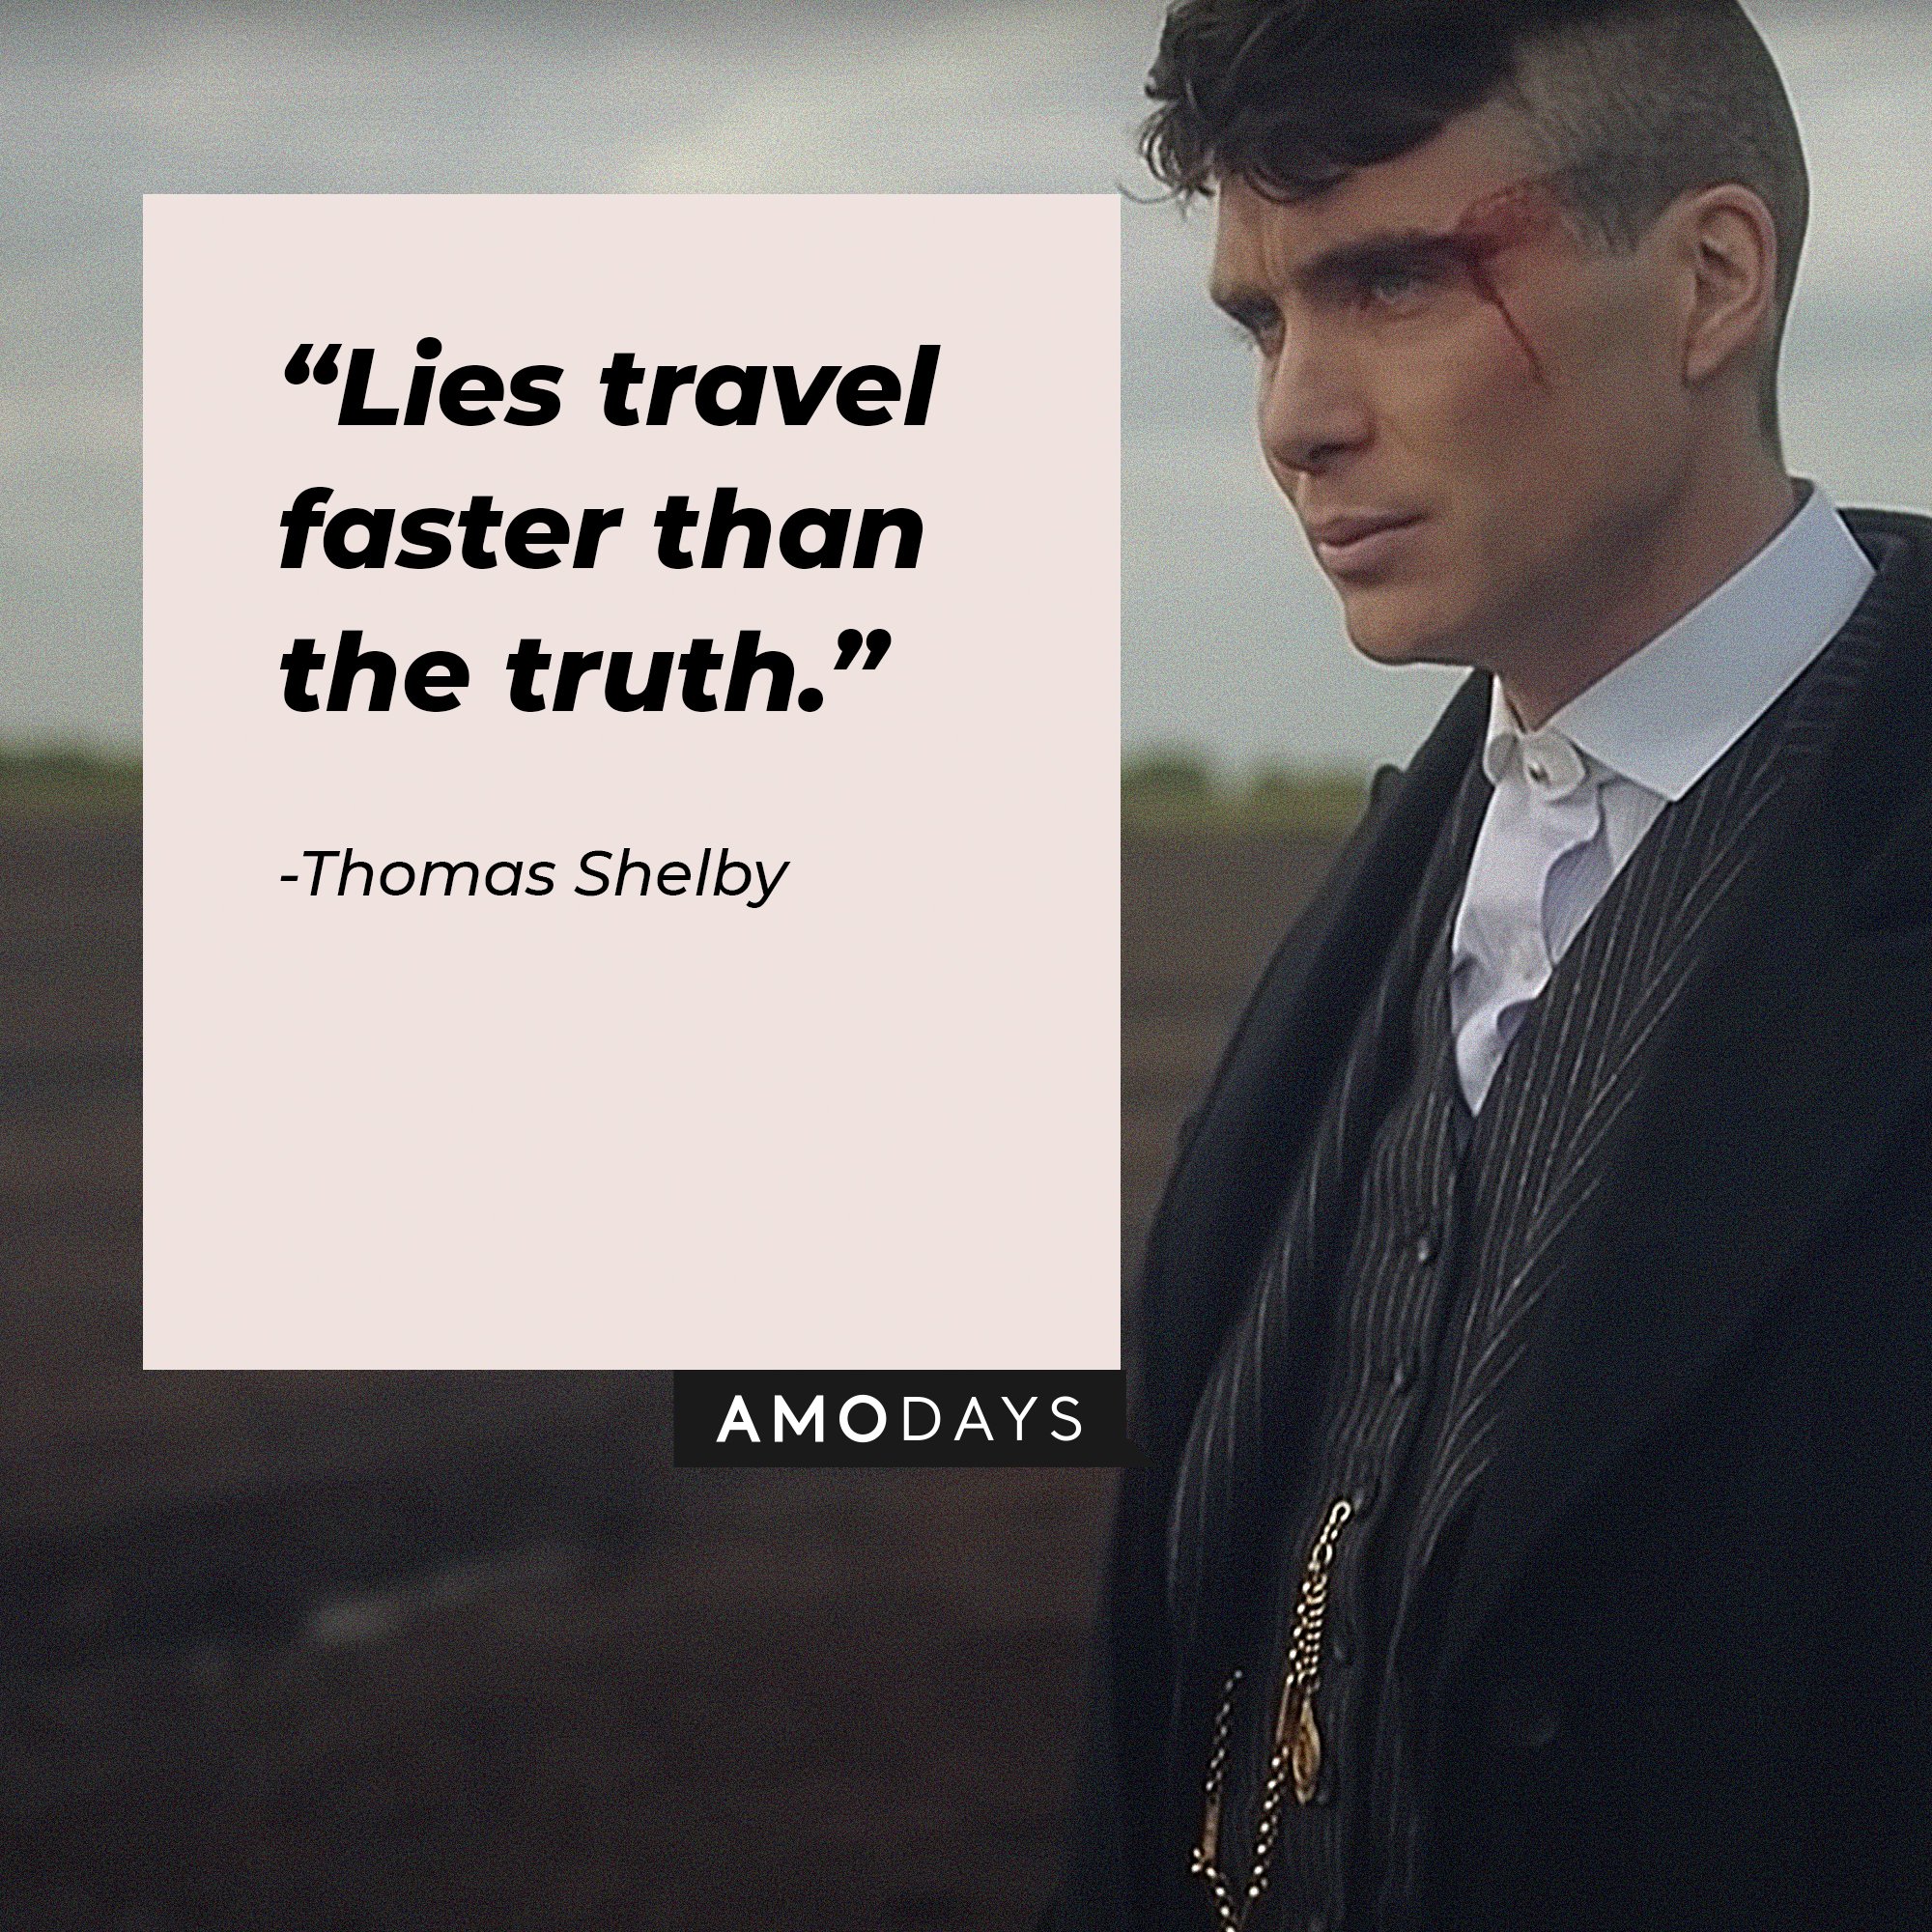 Thomas Shelby's quote: “Lies travel faster than the truth.”  | Image: AmoDays